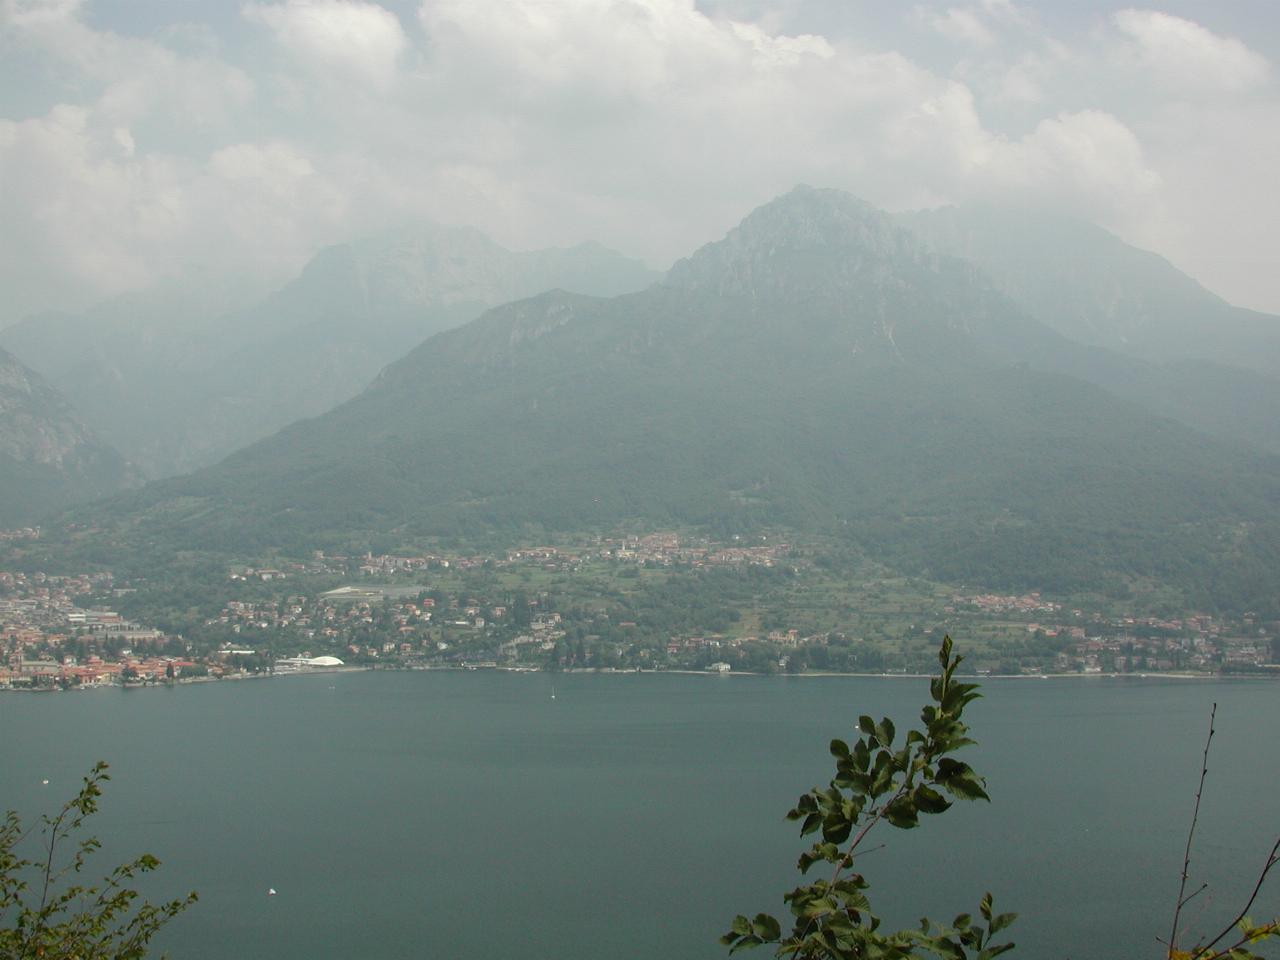 Looking across Lake Lecco towards the east